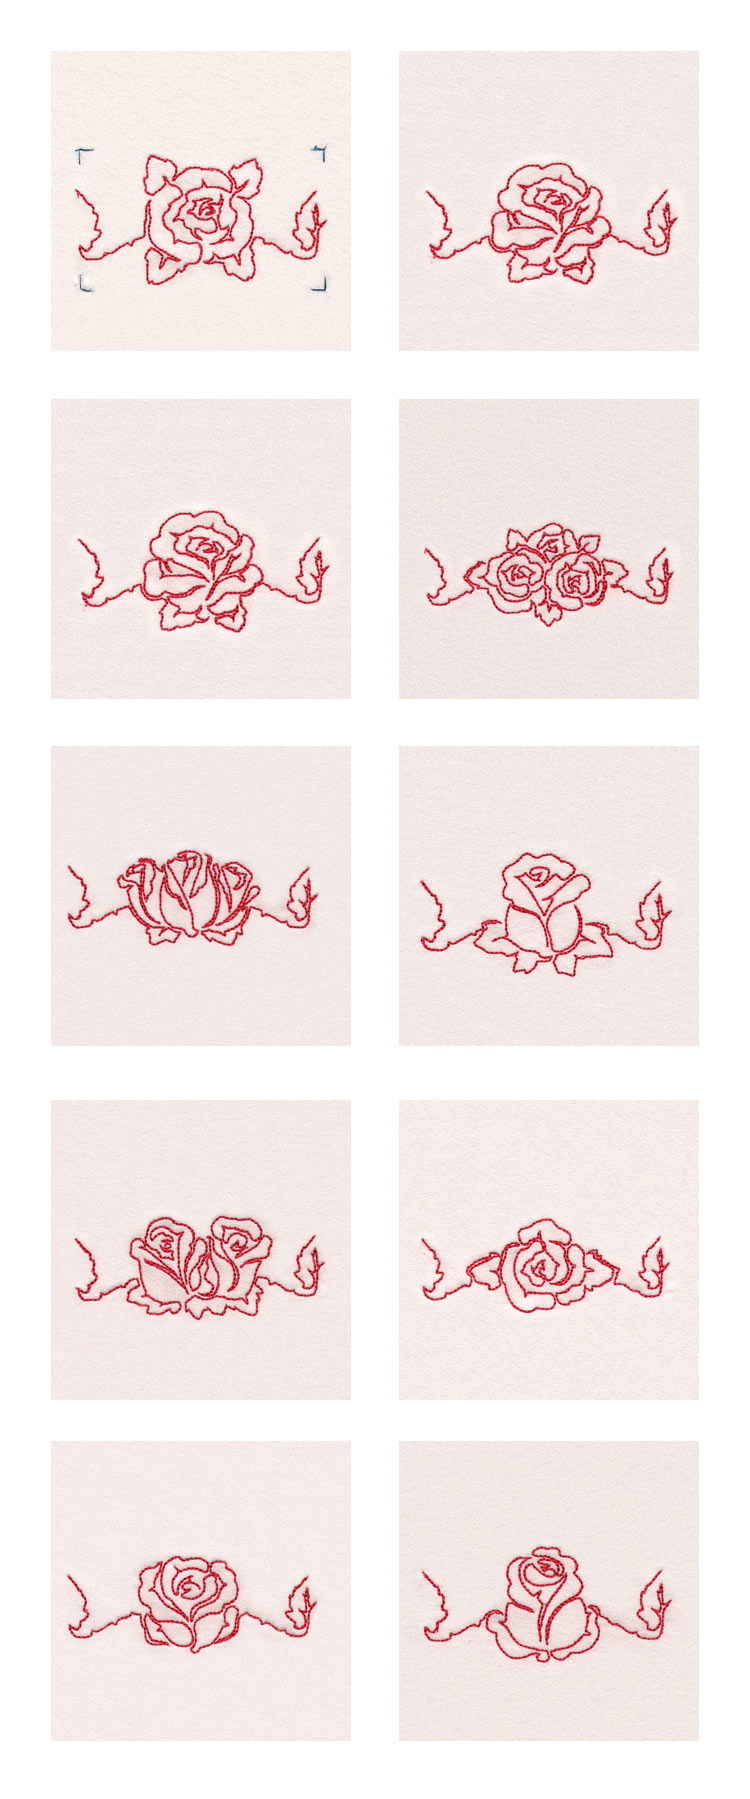 Lineart Roses Borders Embroidery Machine Design Details